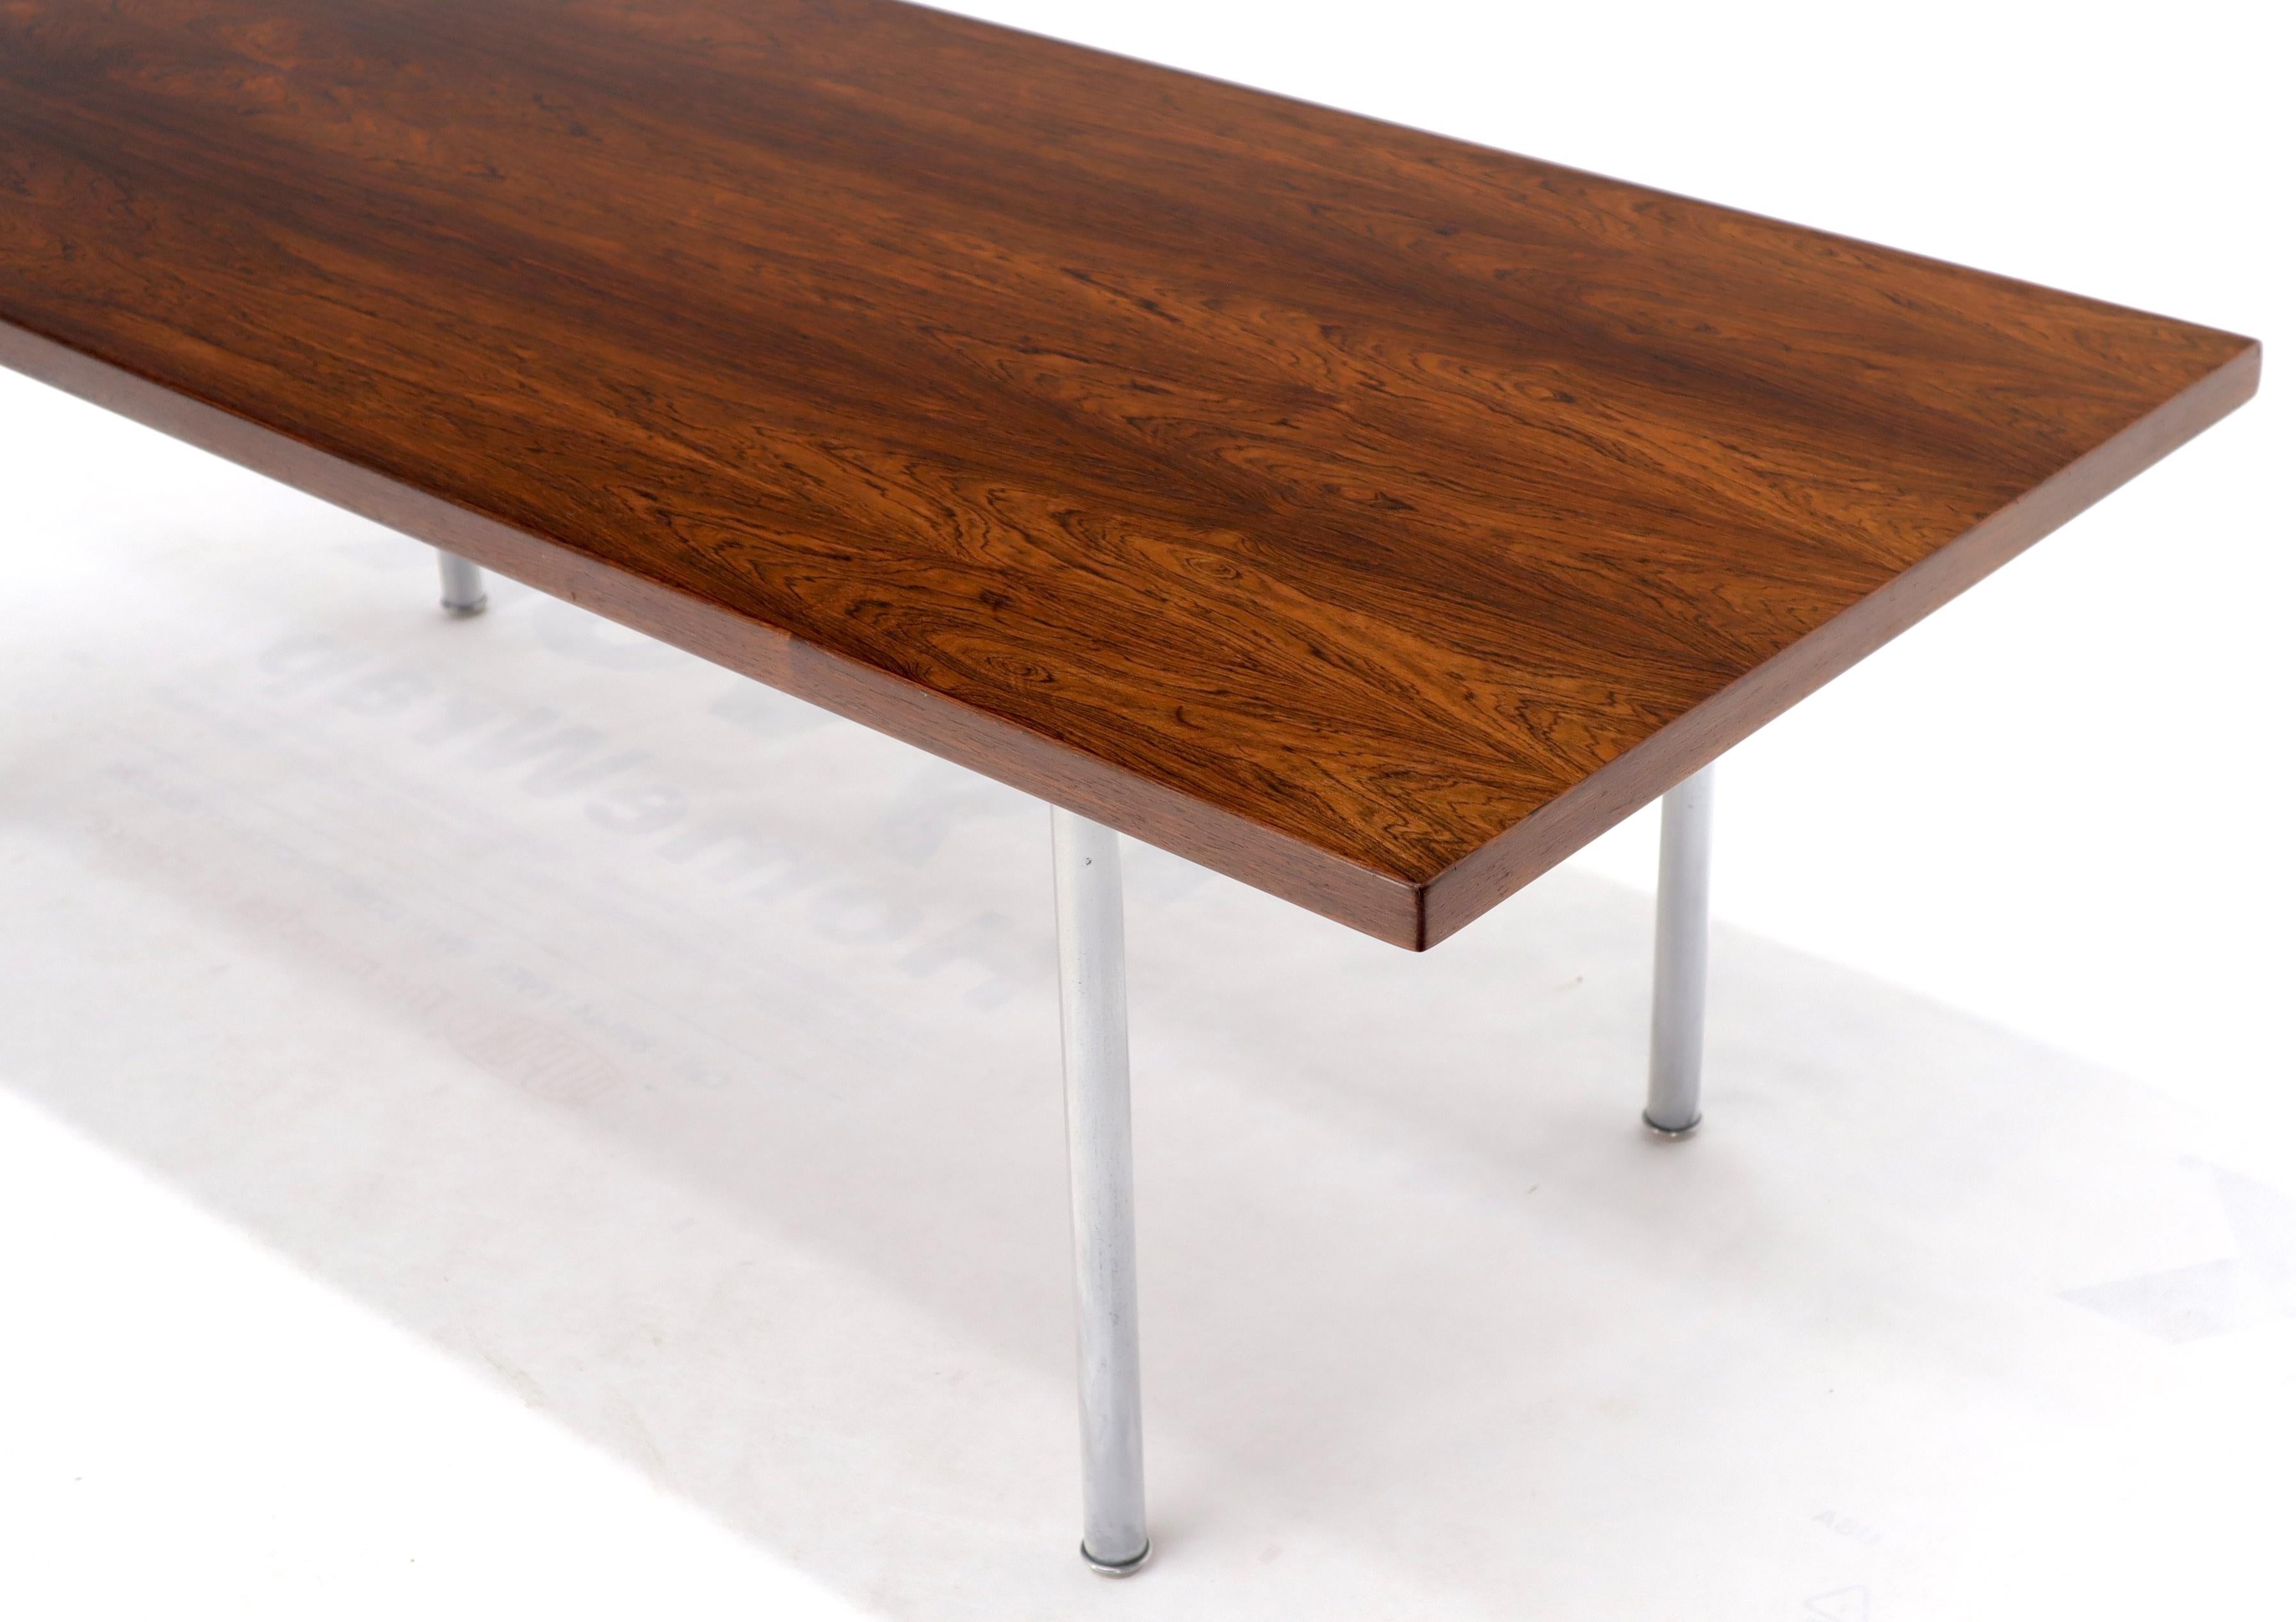 Hans Wegner Signed Rosewood Coffee Table on Chrome Cylinder Legs In Good Condition For Sale In Rockaway, NJ